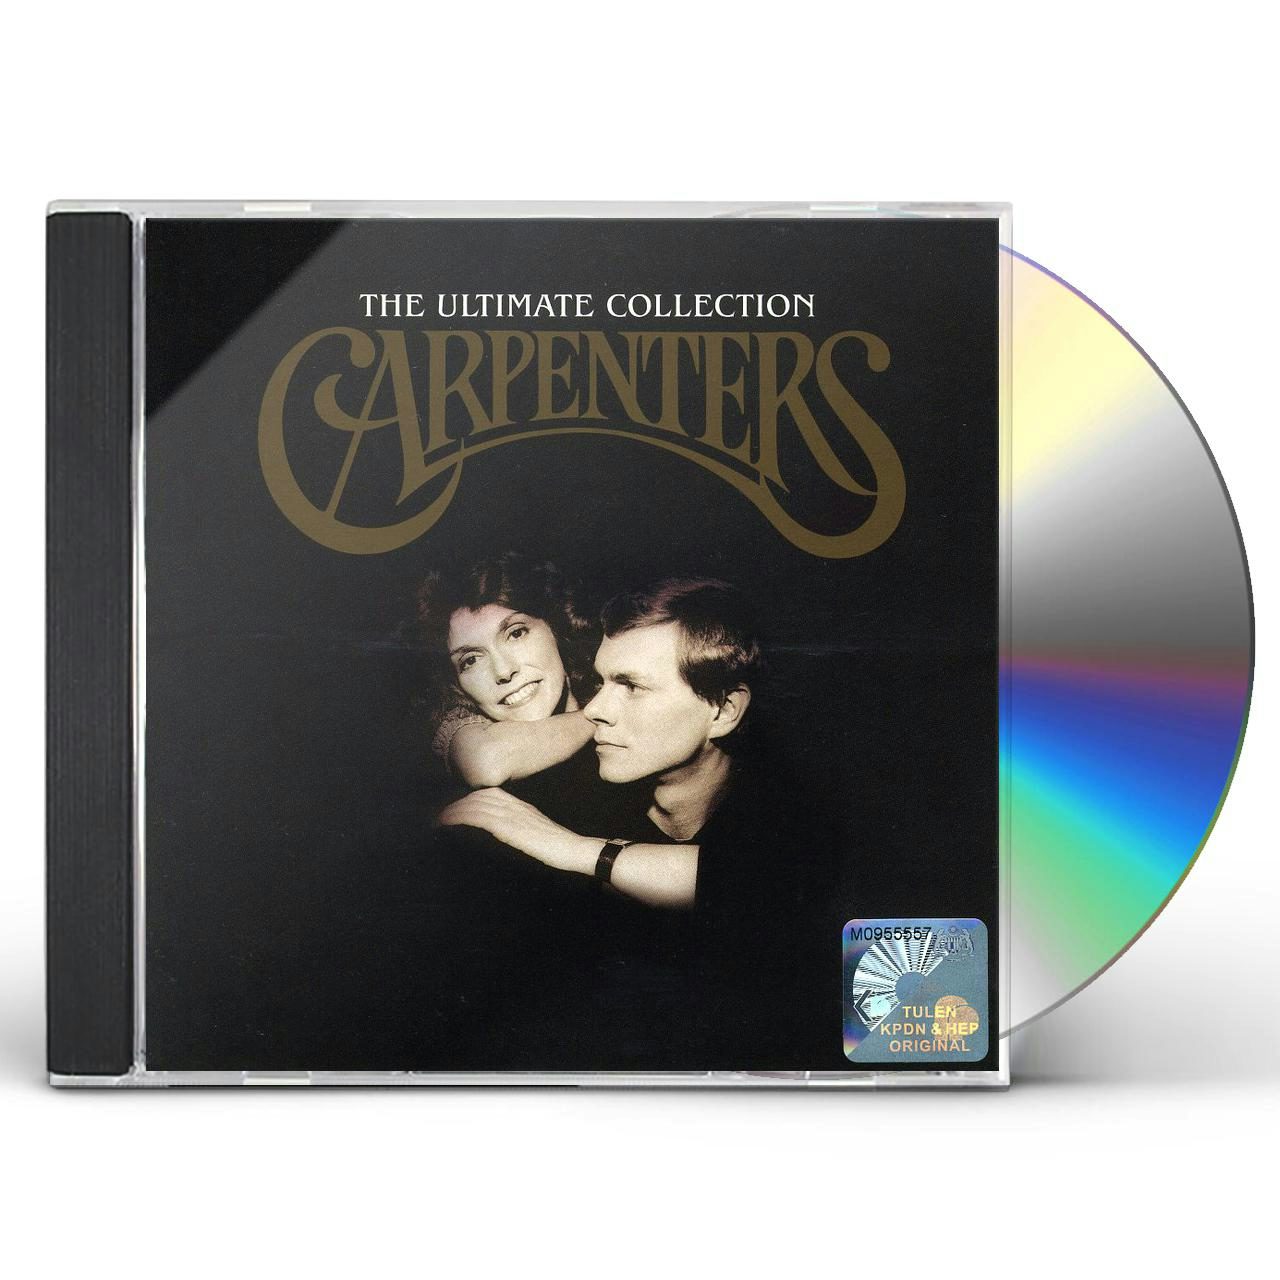 Carpenters ULTIMATE COLLECTION CD $24.99$22.49